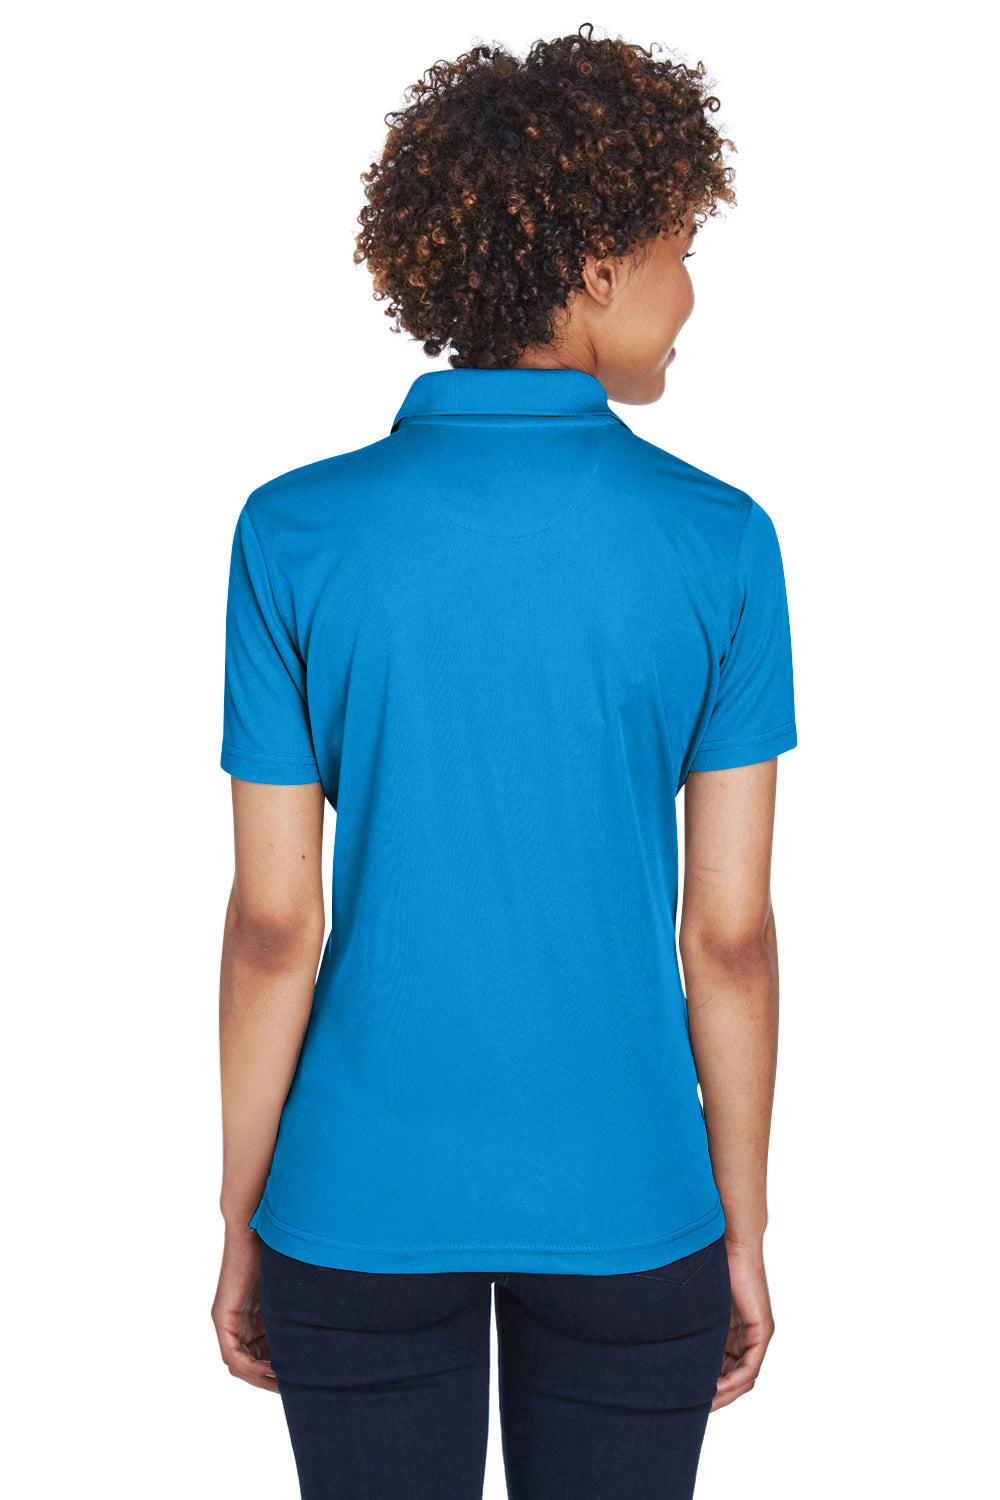 UltraClub 8210L Womens Cool & Dry Moisture Wicking Short Sleeve Polo Shirt Pacific Blue Back